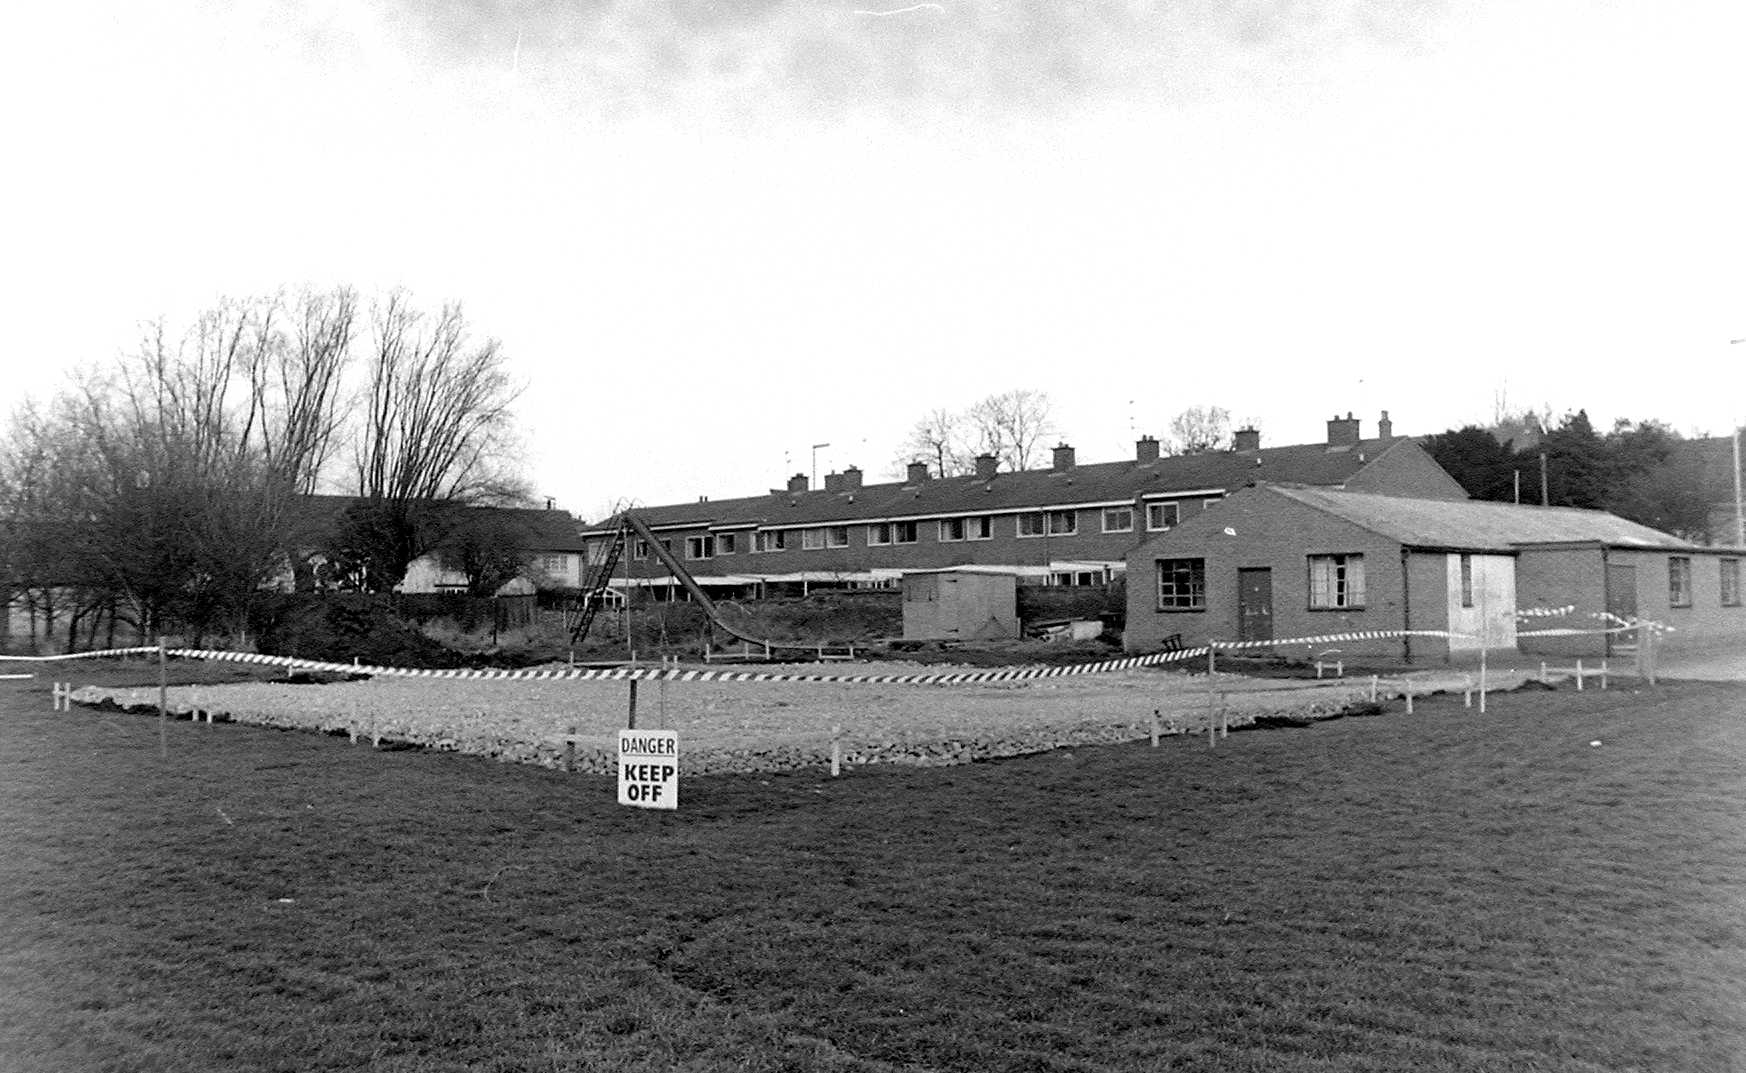 Foundations for the new Village Hall in 1981